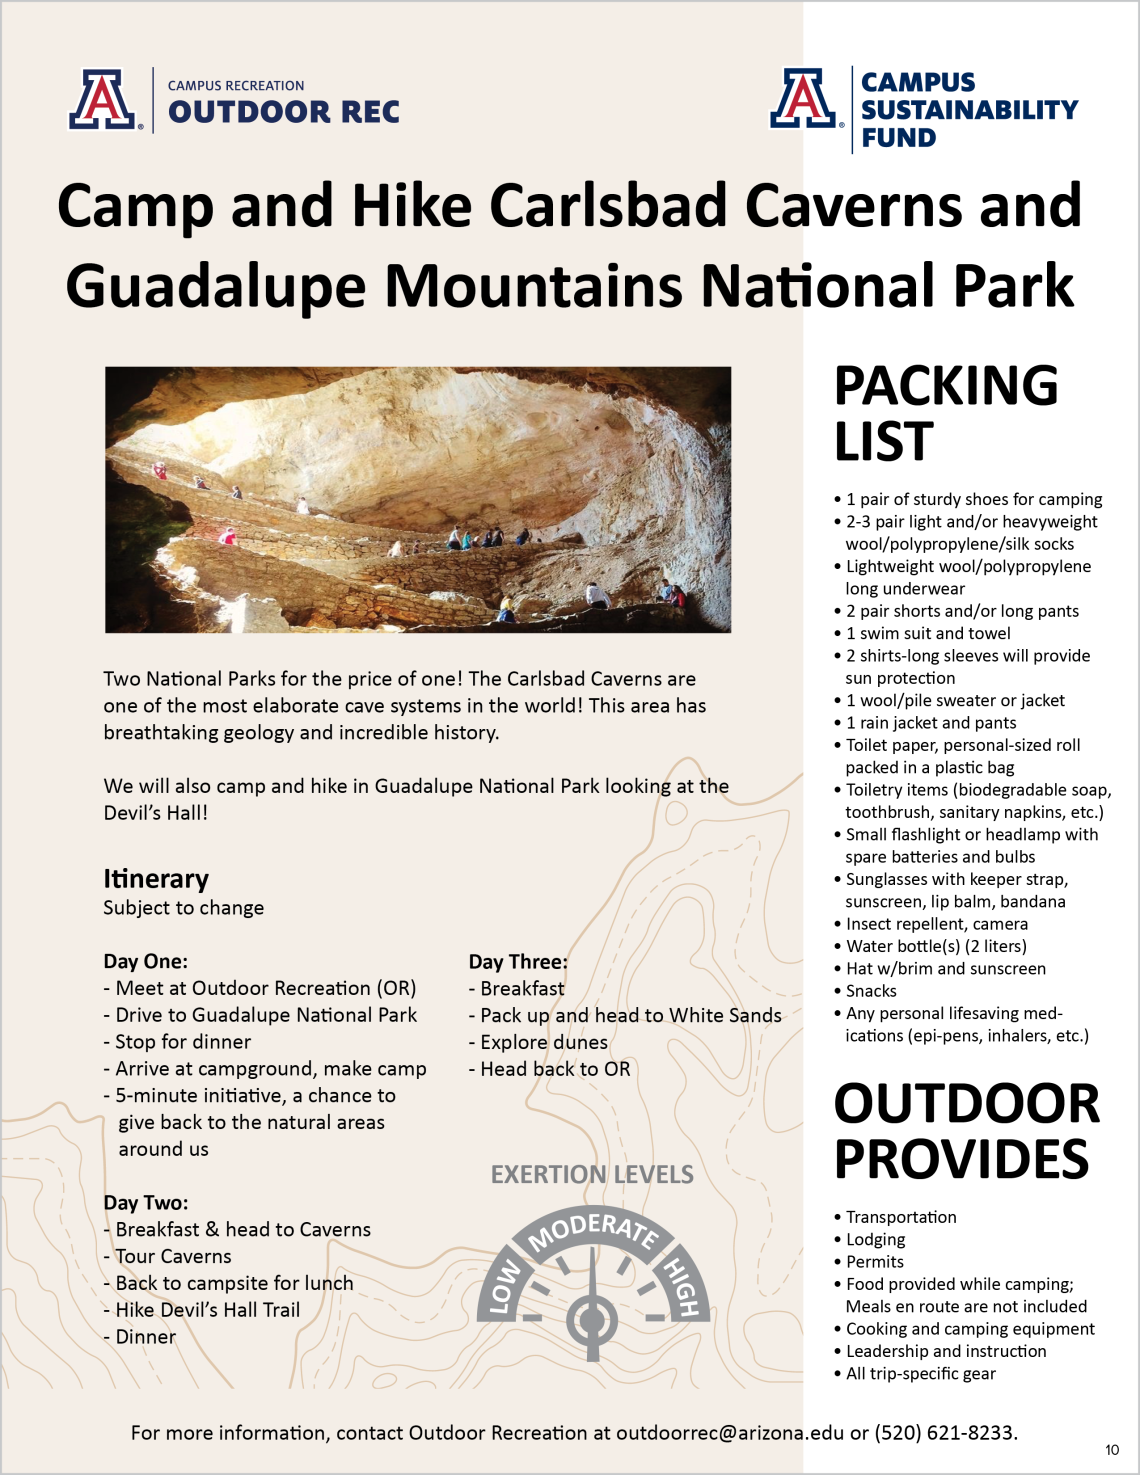 Camp and Hike – Carlsbad Caverns and Guadalupe Mountains National Park